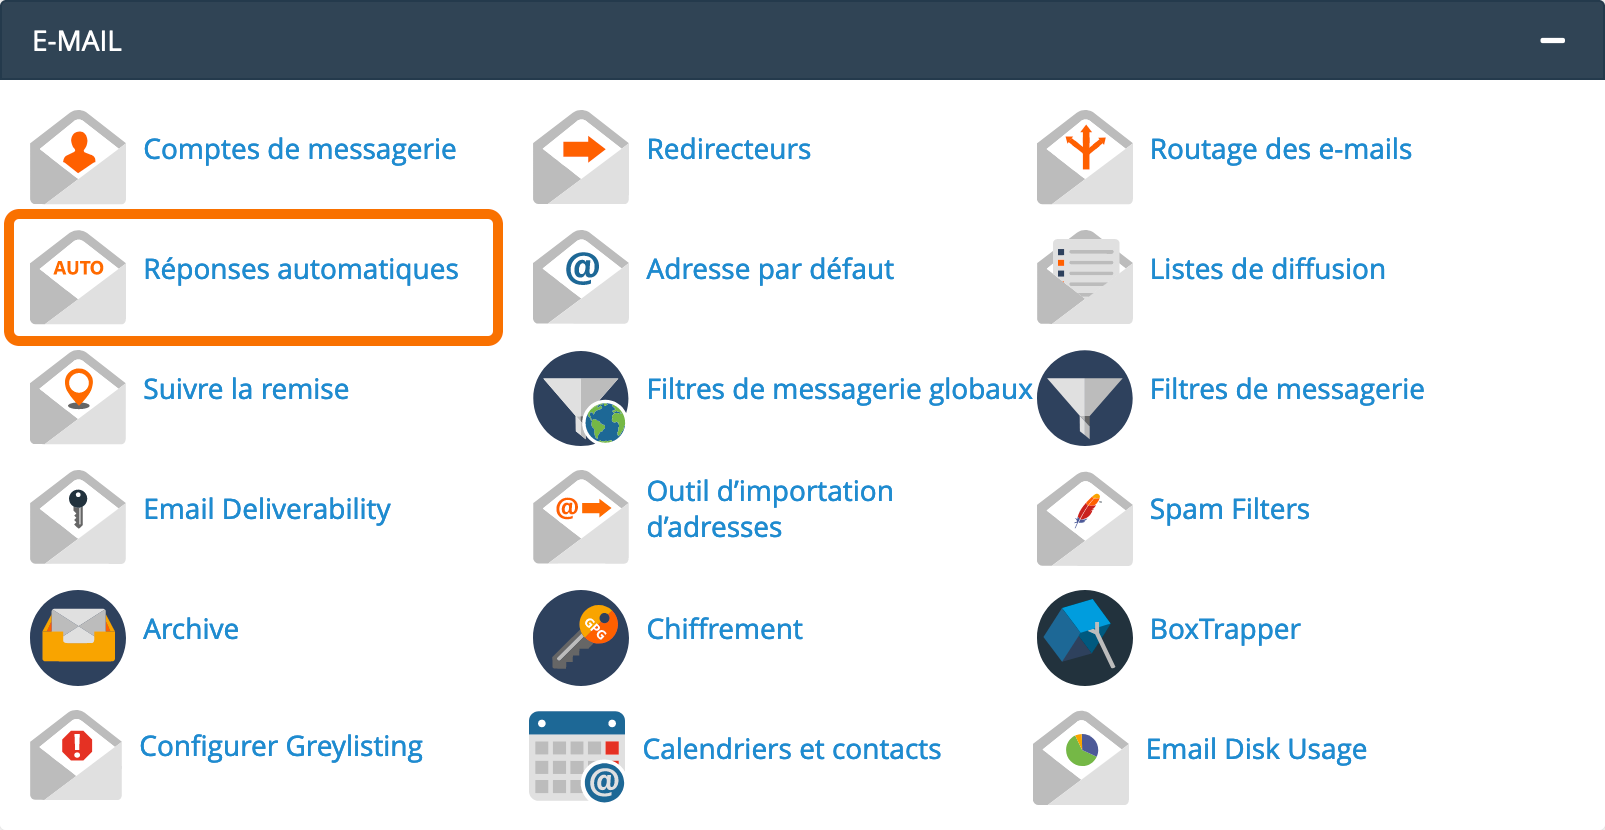 cpanel-email-reponse-automatique.png